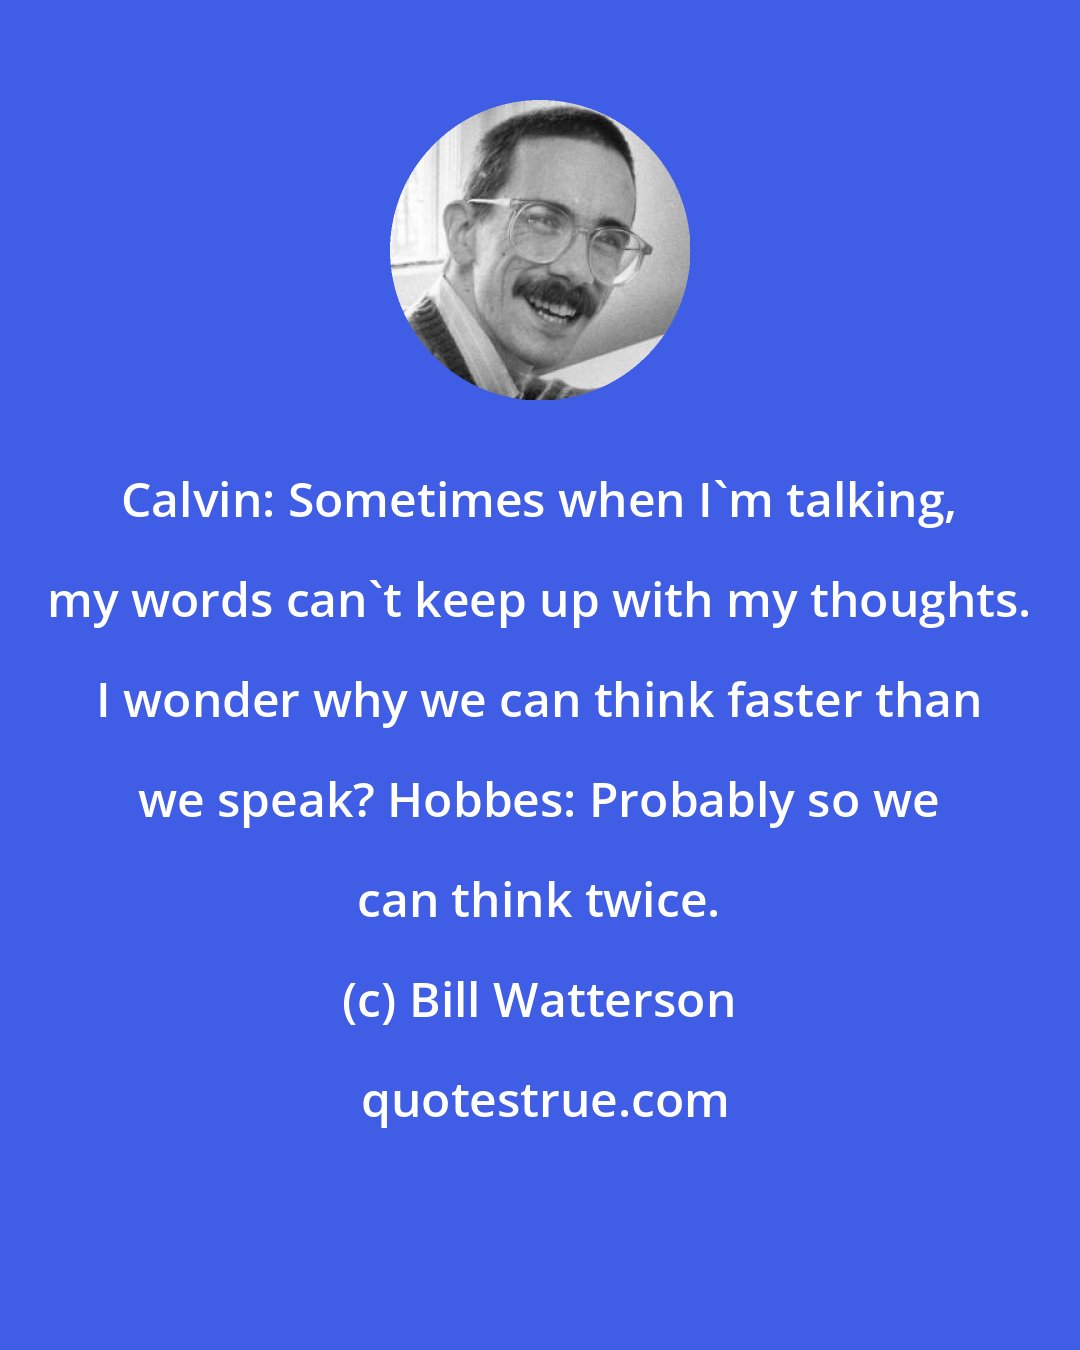 Bill Watterson: Calvin: Sometimes when I'm talking, my words can't keep up with my thoughts. I wonder why we can think faster than we speak? Hobbes: Probably so we can think twice.